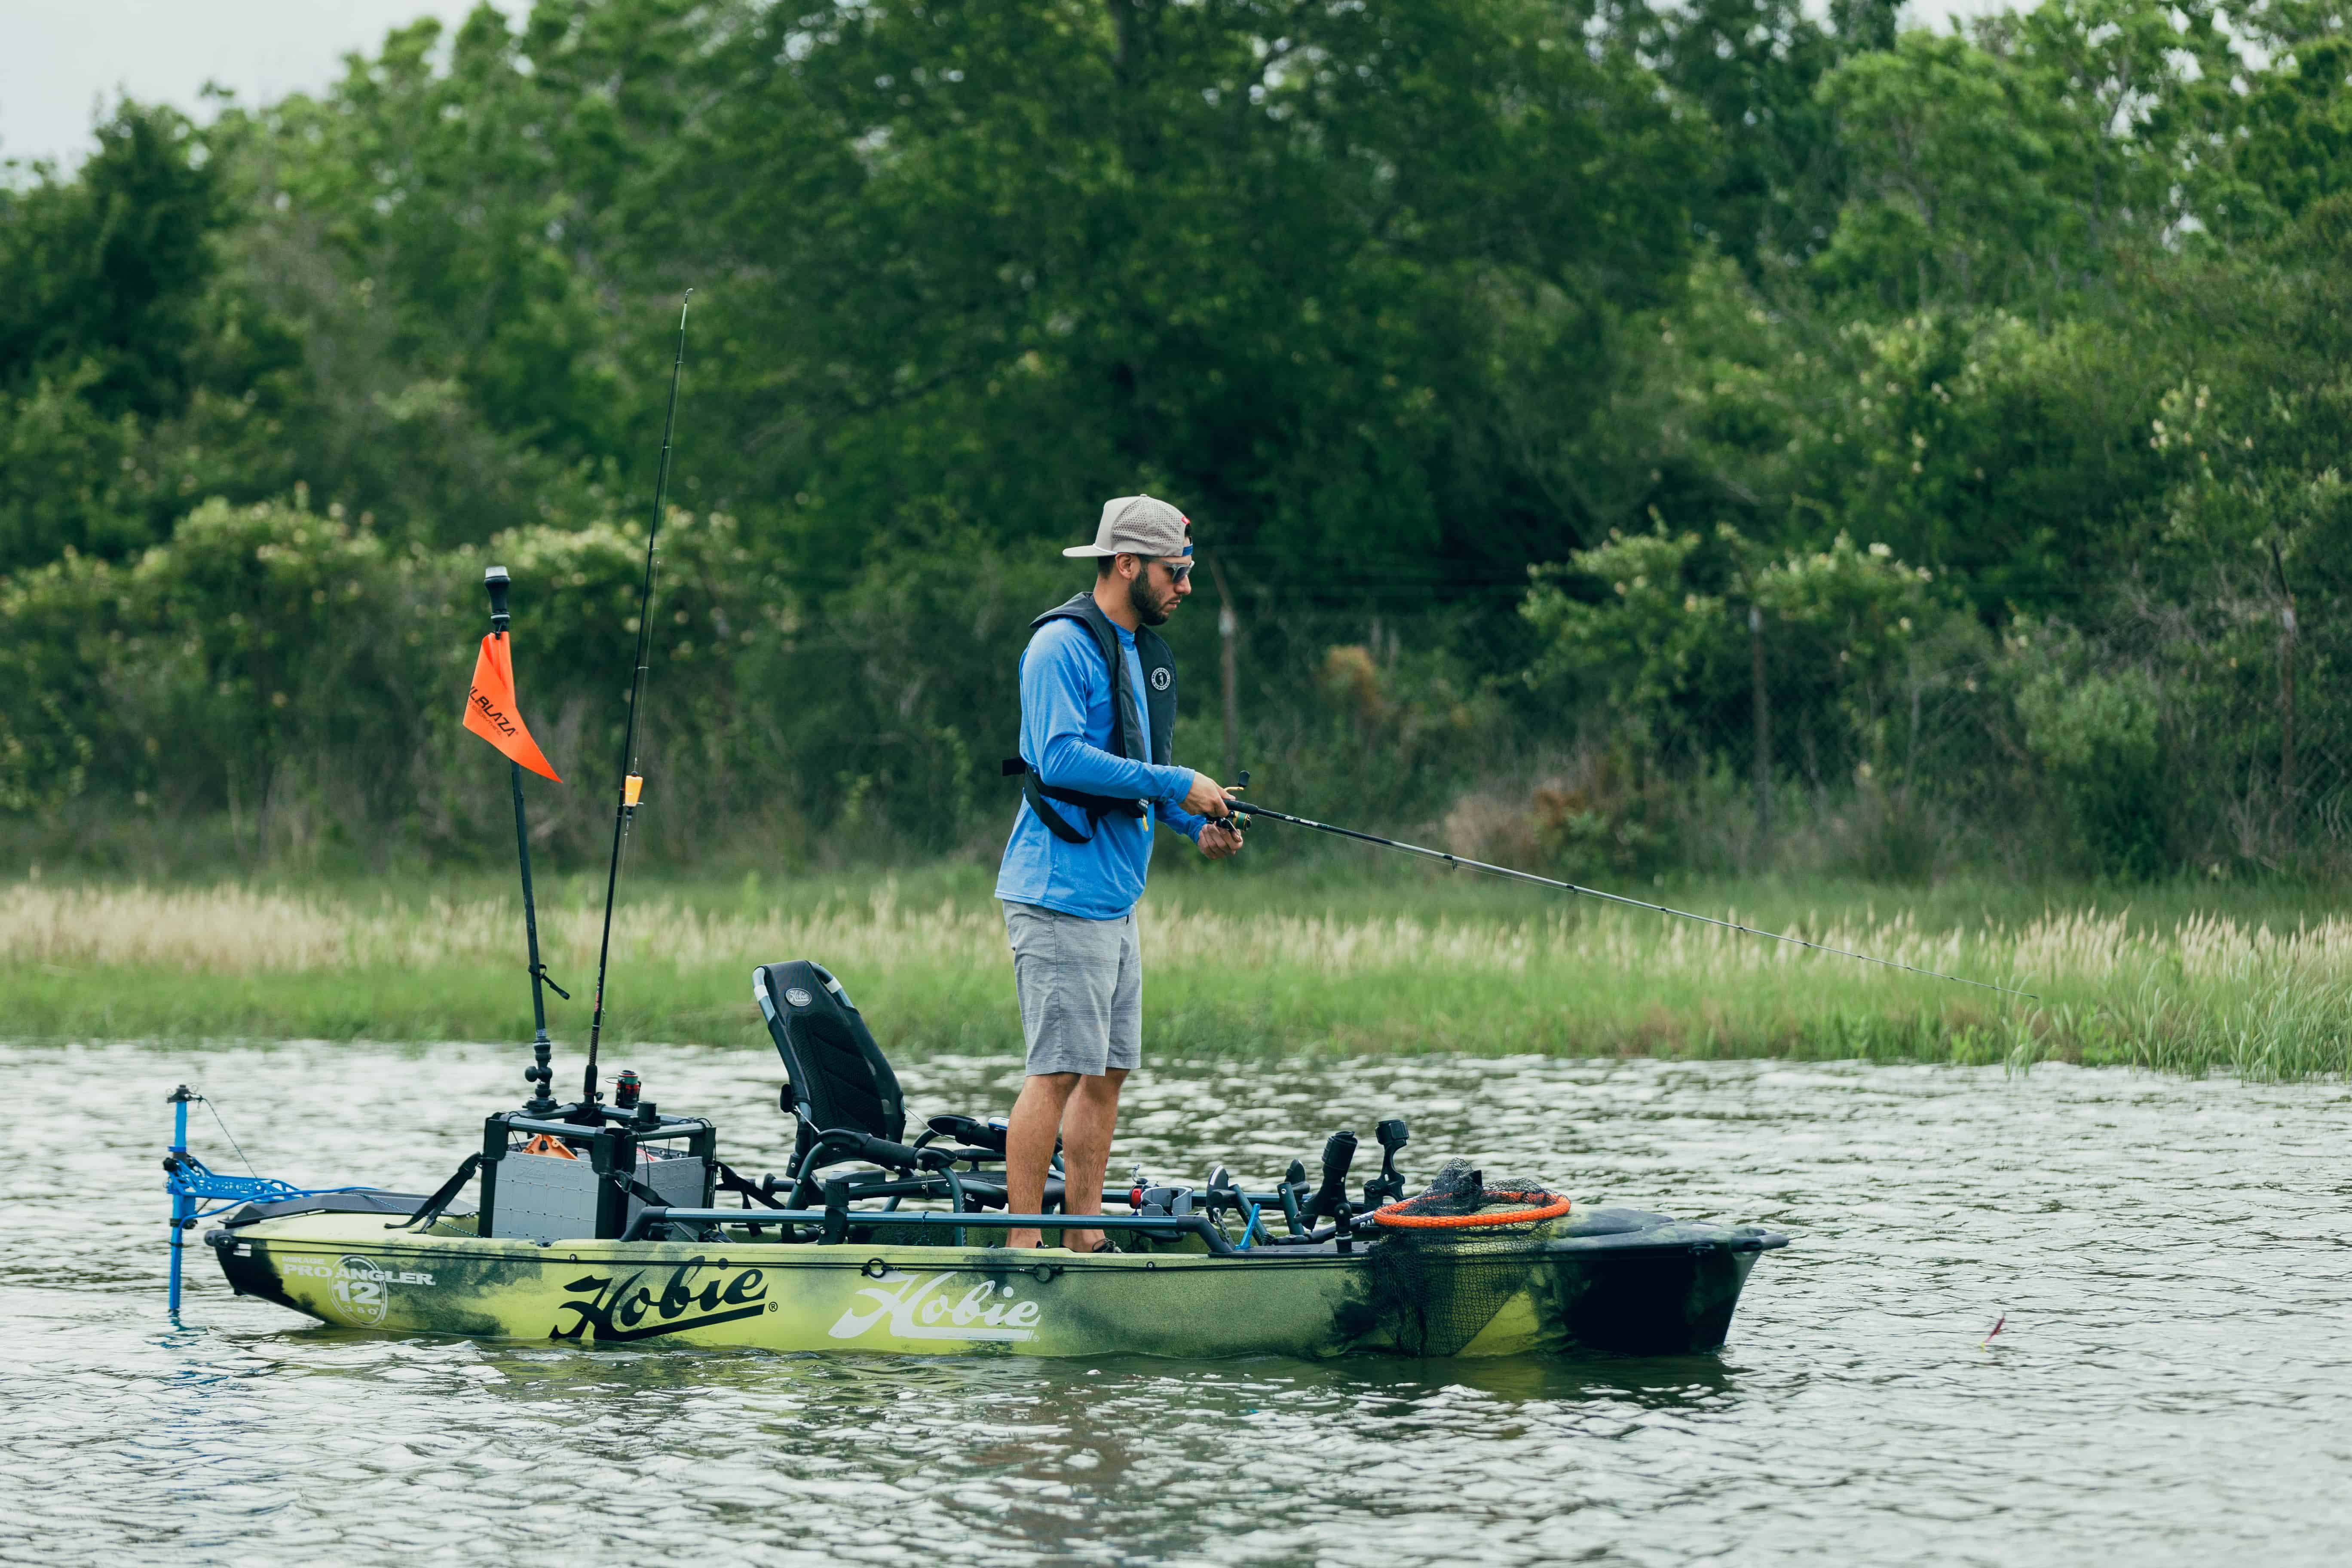 Man fishing from hobie kayak with Bixpy motor attached using a DIY adapter kit